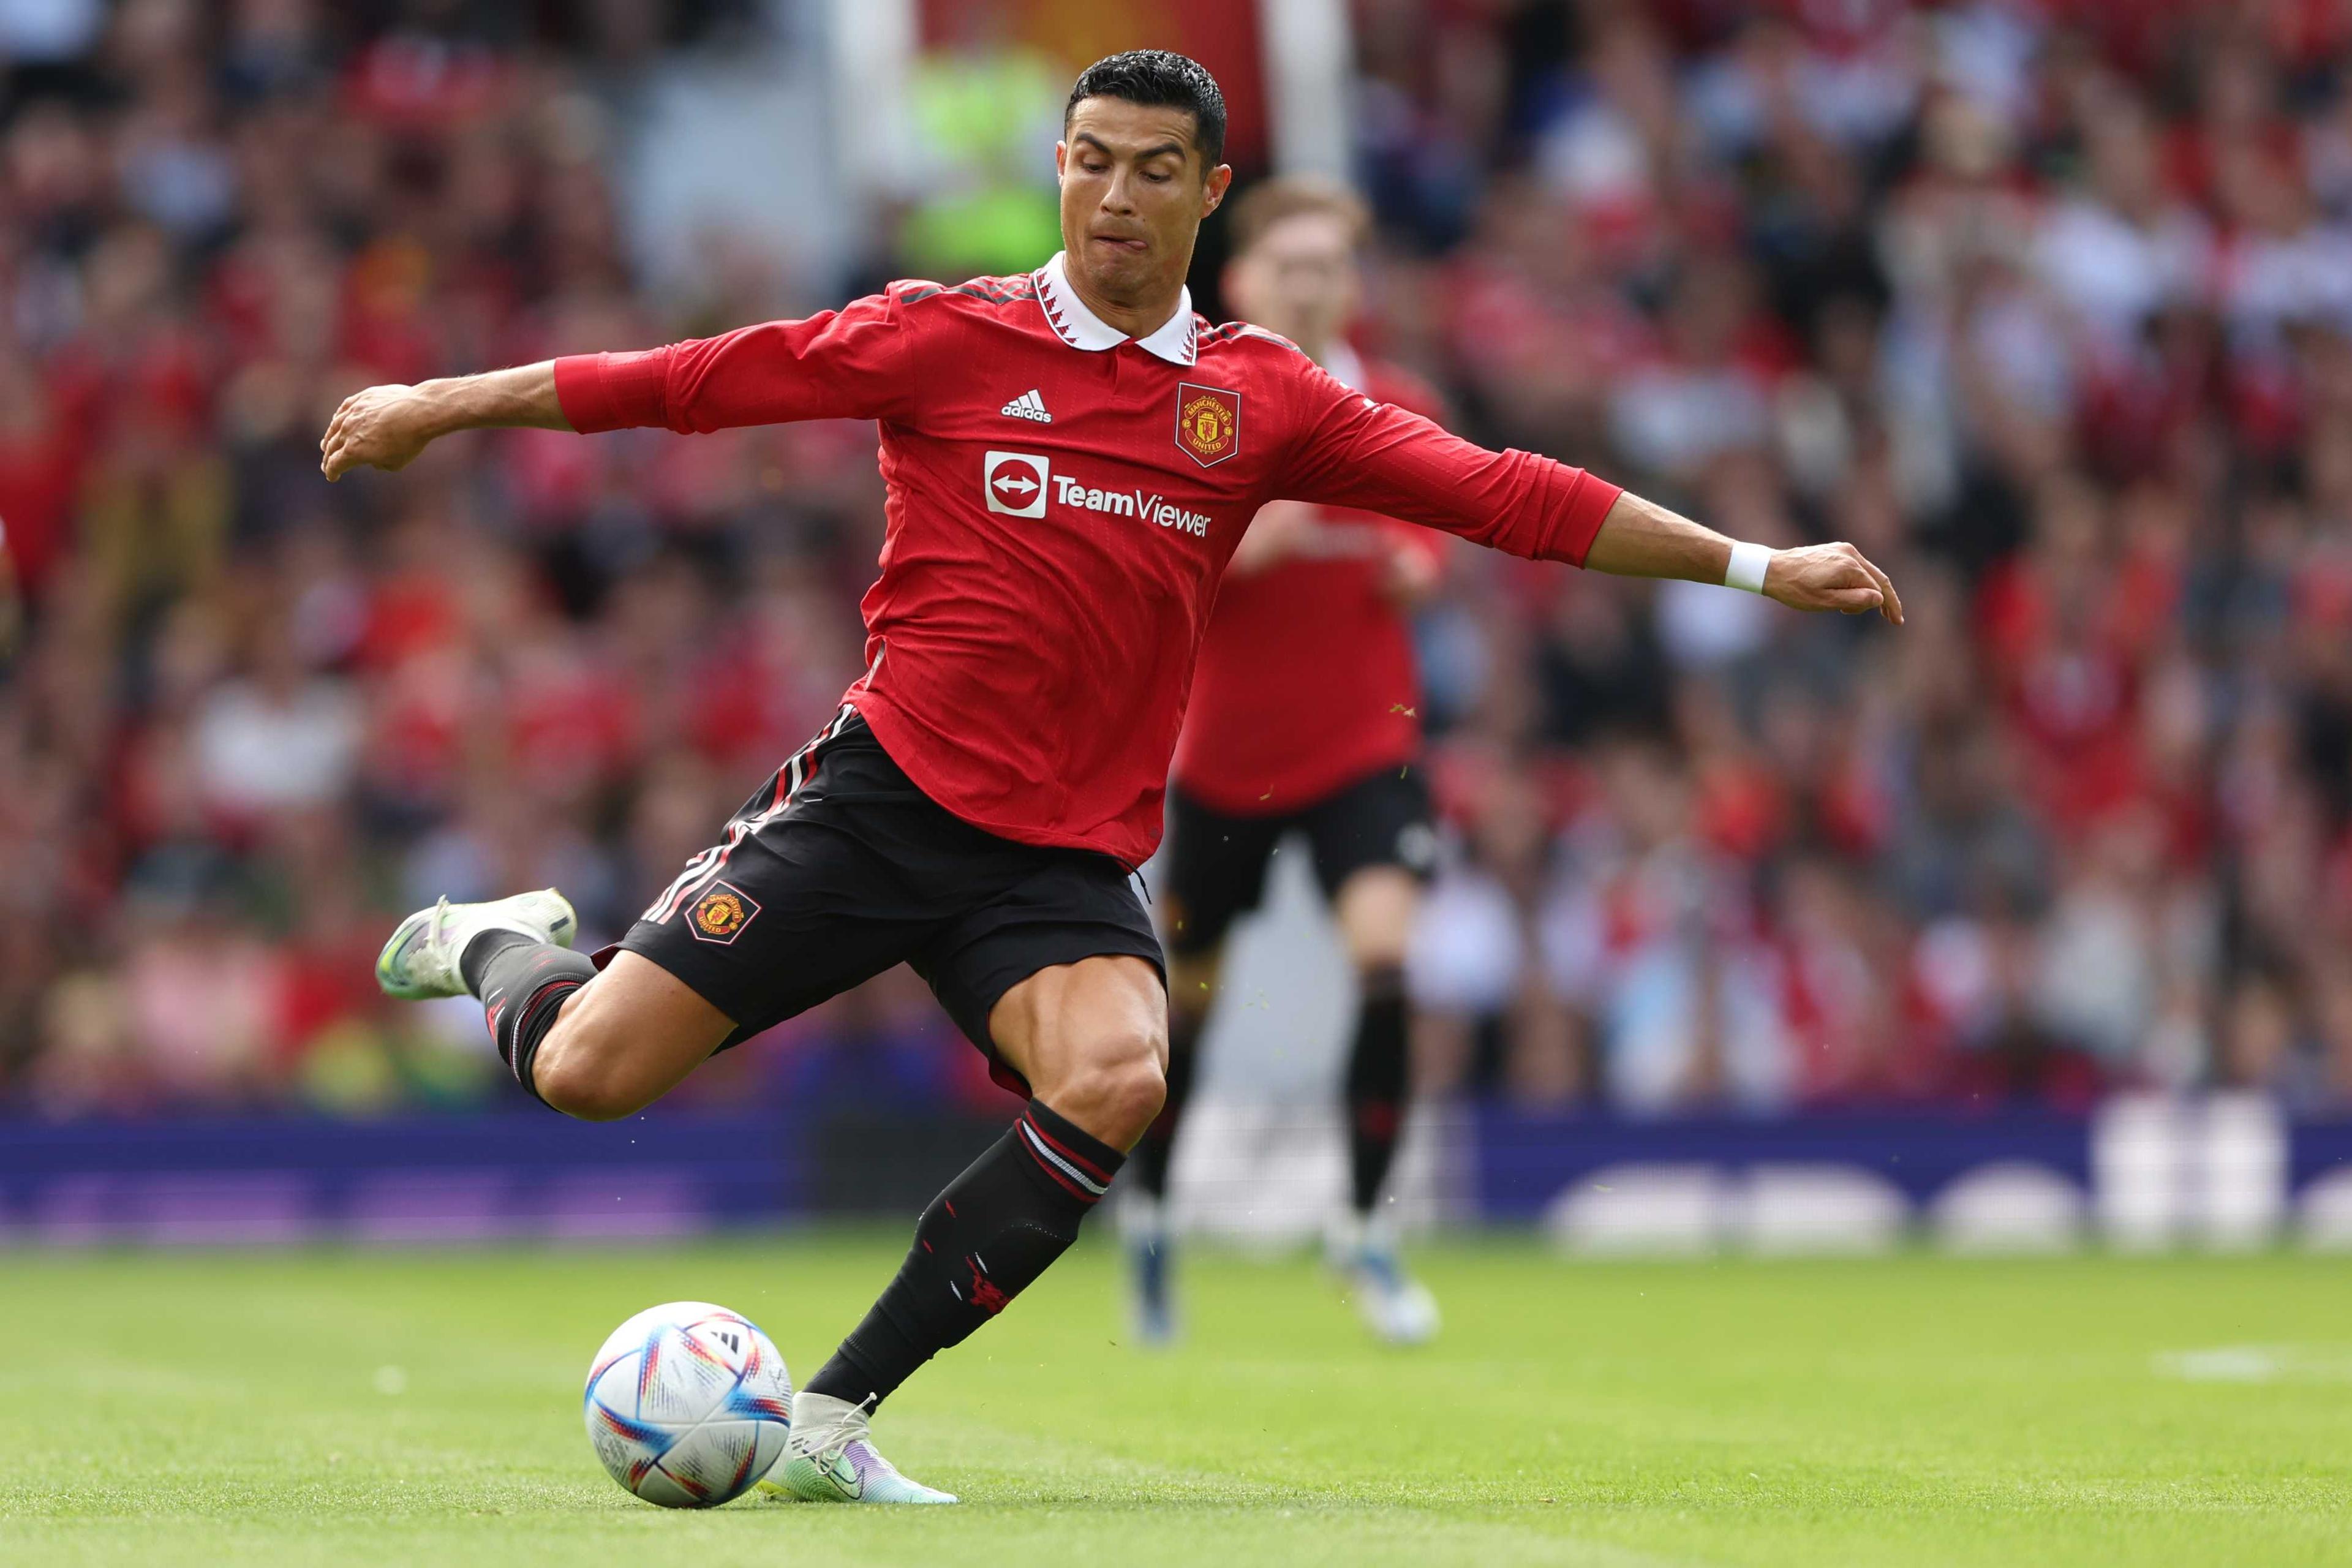 Manchester United's Portuguese striker Cristiano Ronaldo passes the ball during a pre-season club friendly football match between Manchester United and Rayo Vallecano at Old Trafford in Manchester, north west England, on July 31. Photo: AFP 